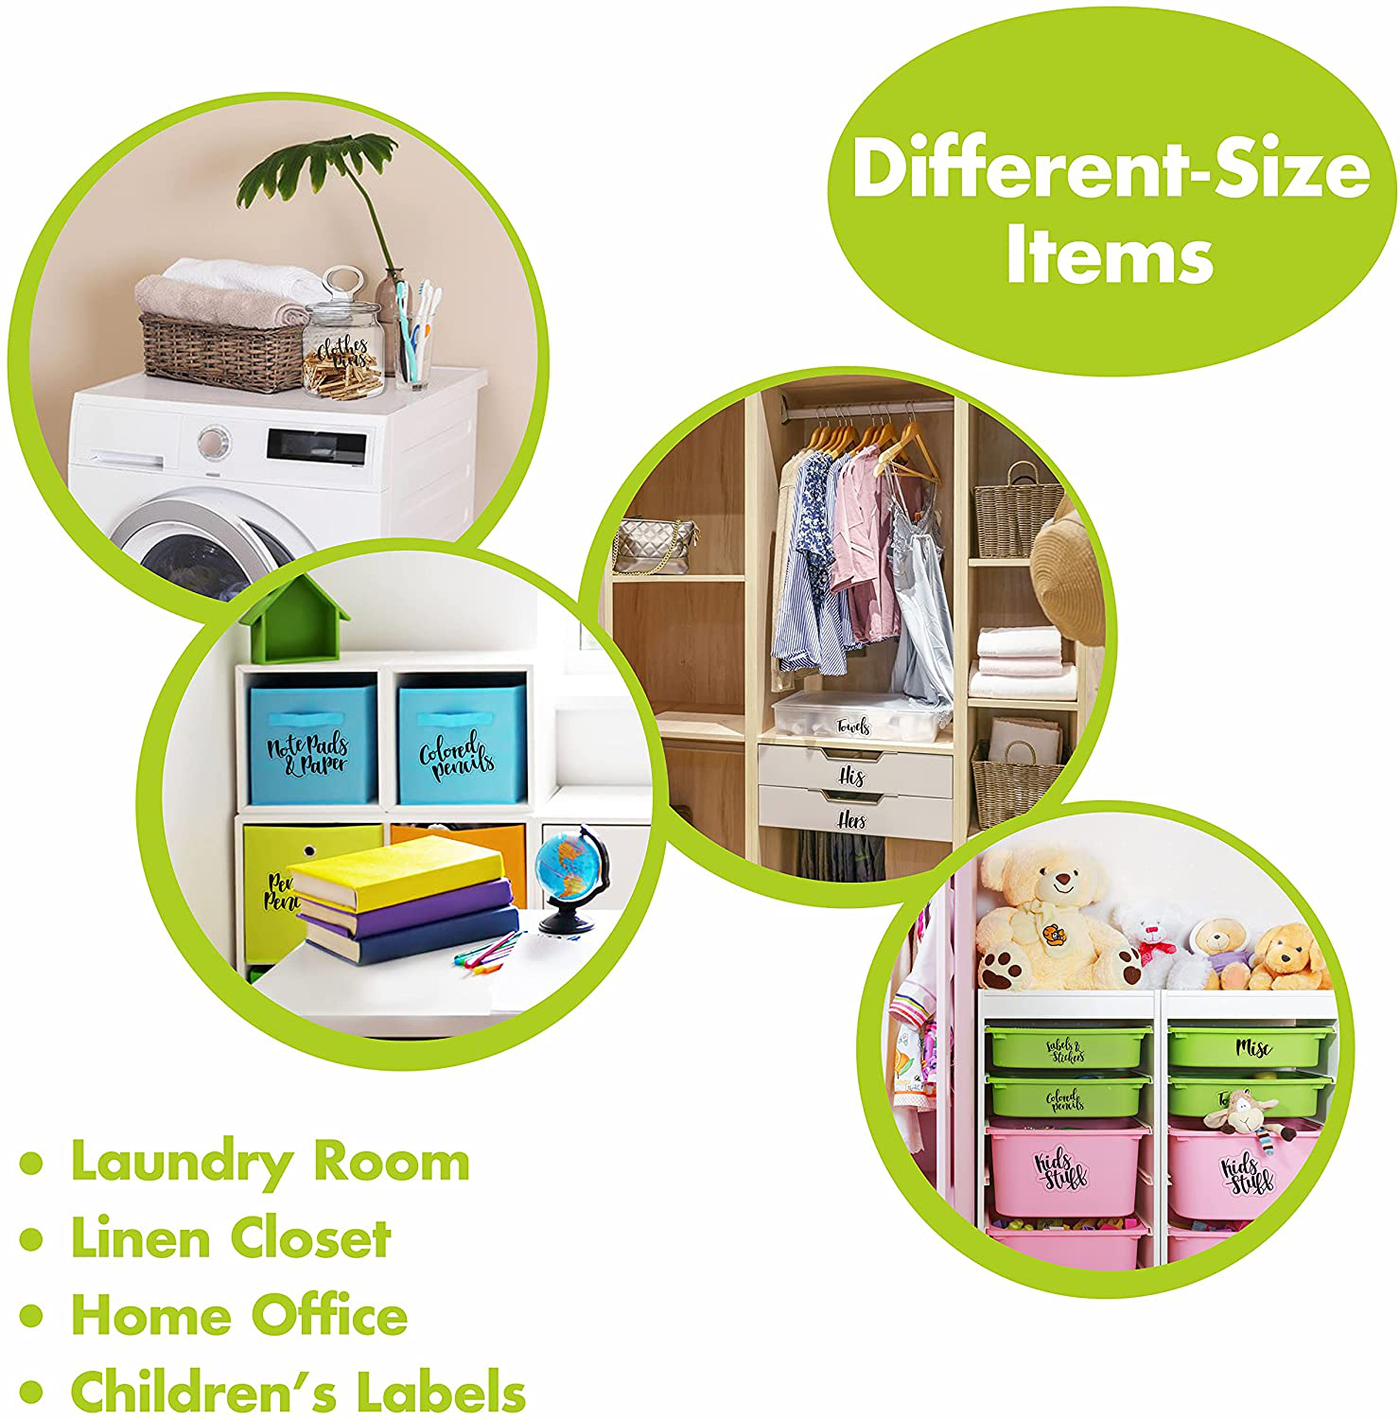 318 PCS Laundry Room & Linen Closet Organization Labels，No Stain Removal, Water/Oil Resistant Stickers for Laundry Room, Linen Closet, Home Office, Bathroom and The Beauty Organization.